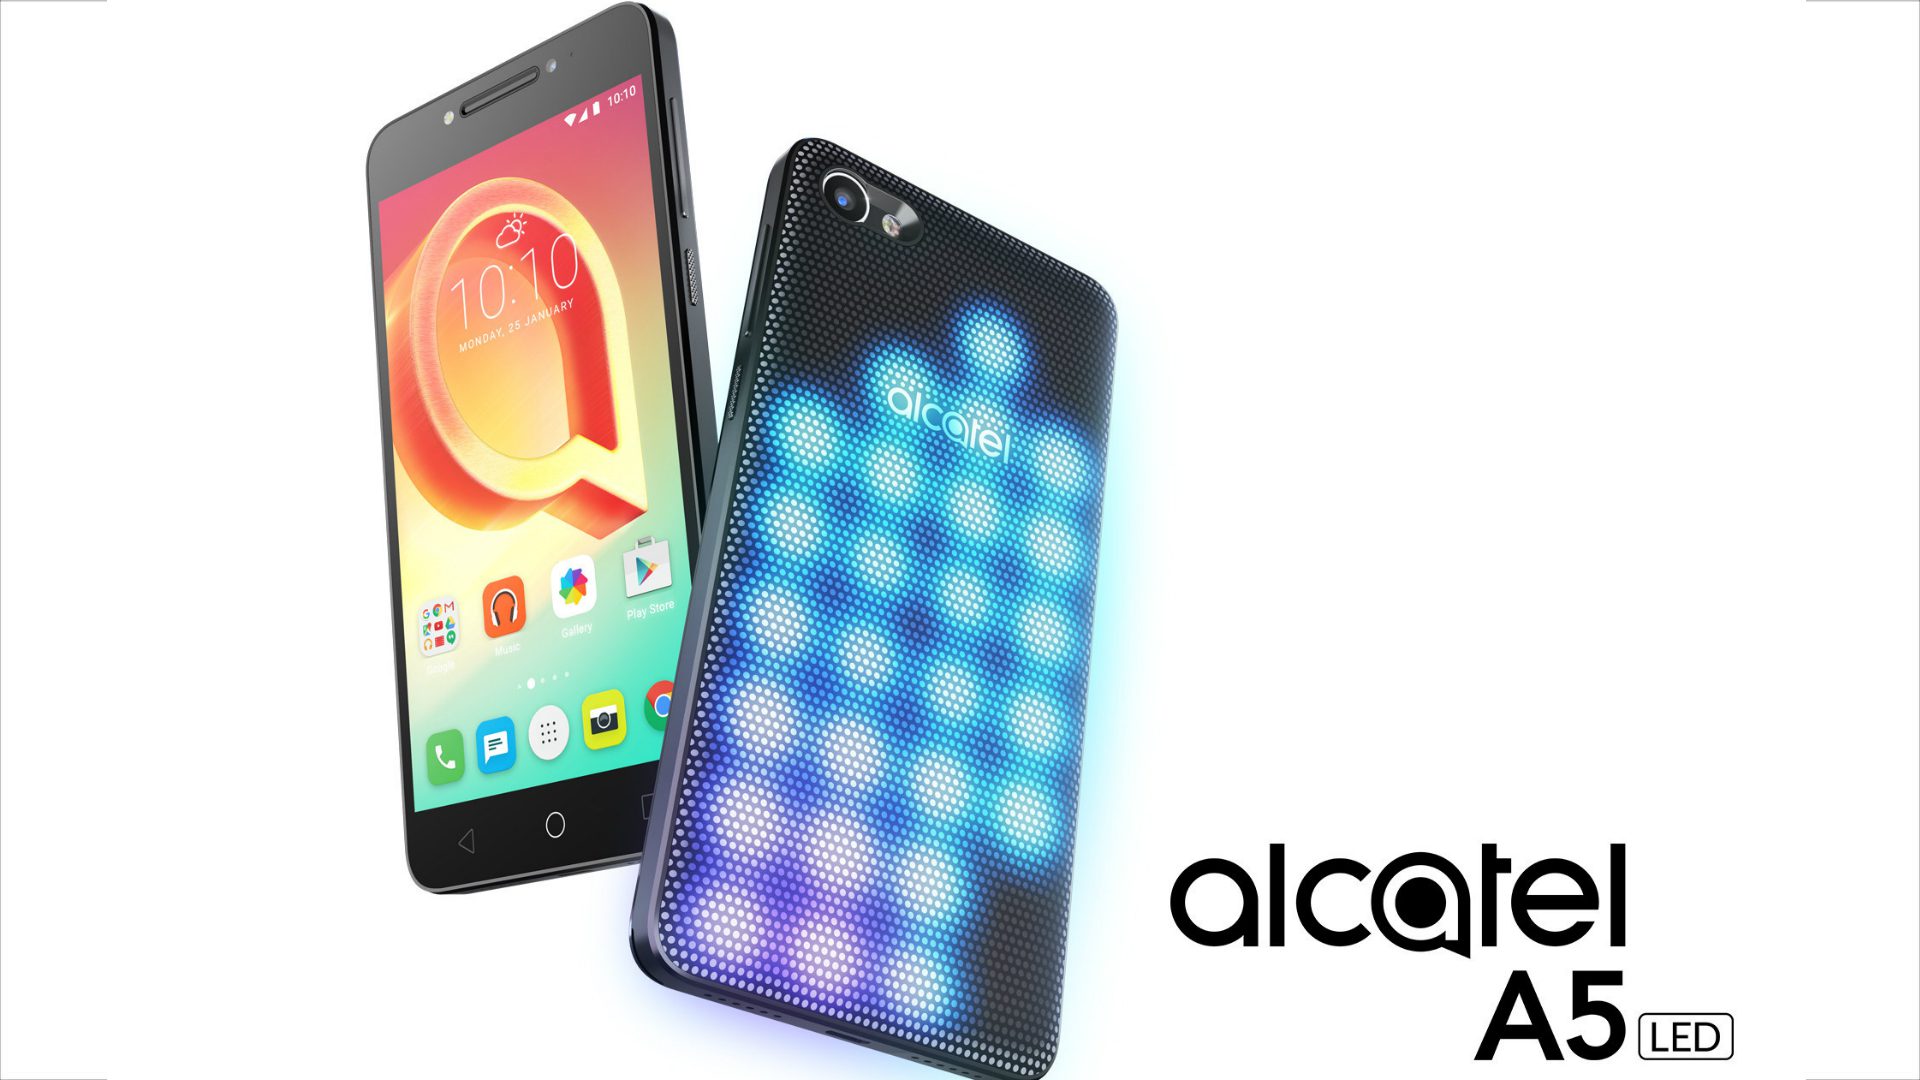 Alcatel Launches A5 LED, the World’s First Interactive LED-covered Smartphone